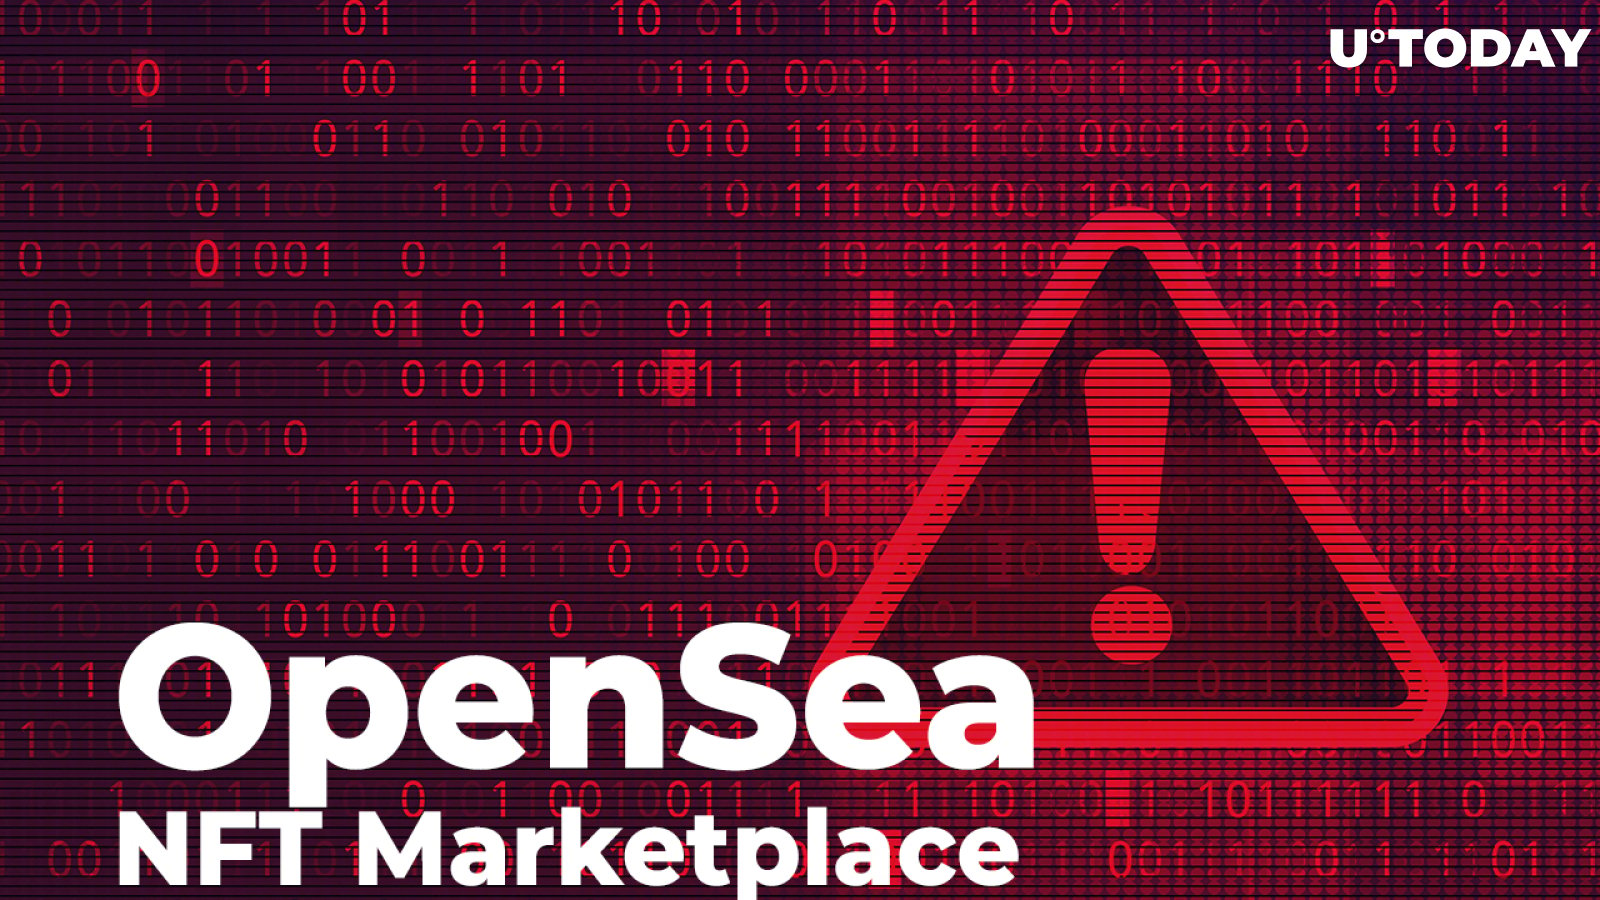 OpenSea NFT Marketplace Under Attack: What We Know So Far